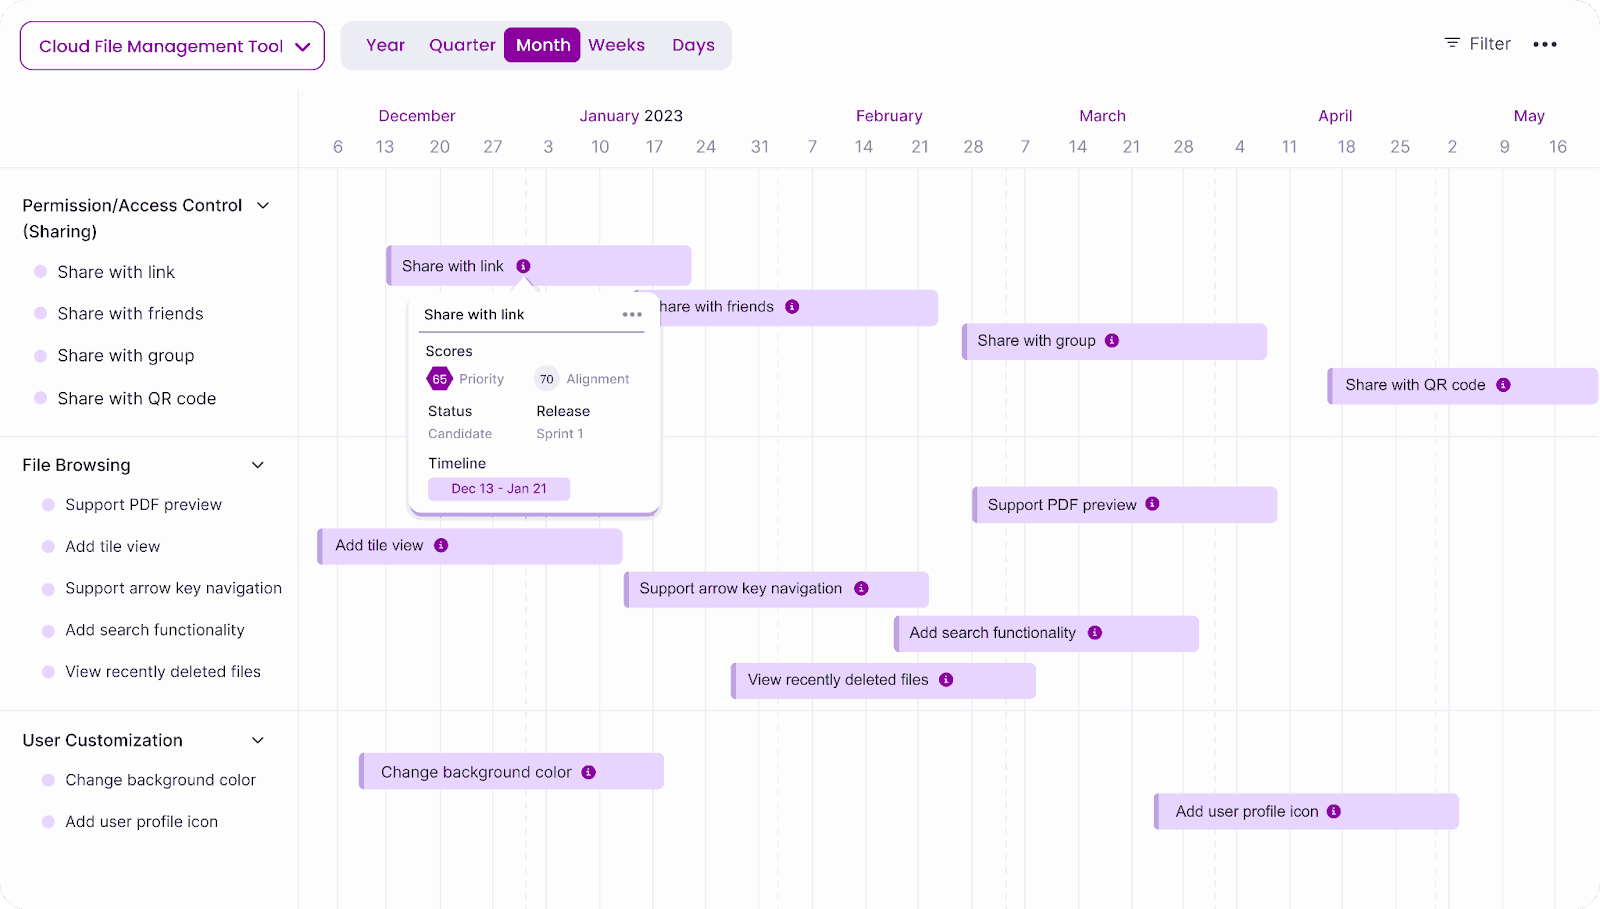 Build agile, customizable product roadmaps tailored to your team’s unique prioritization framework.